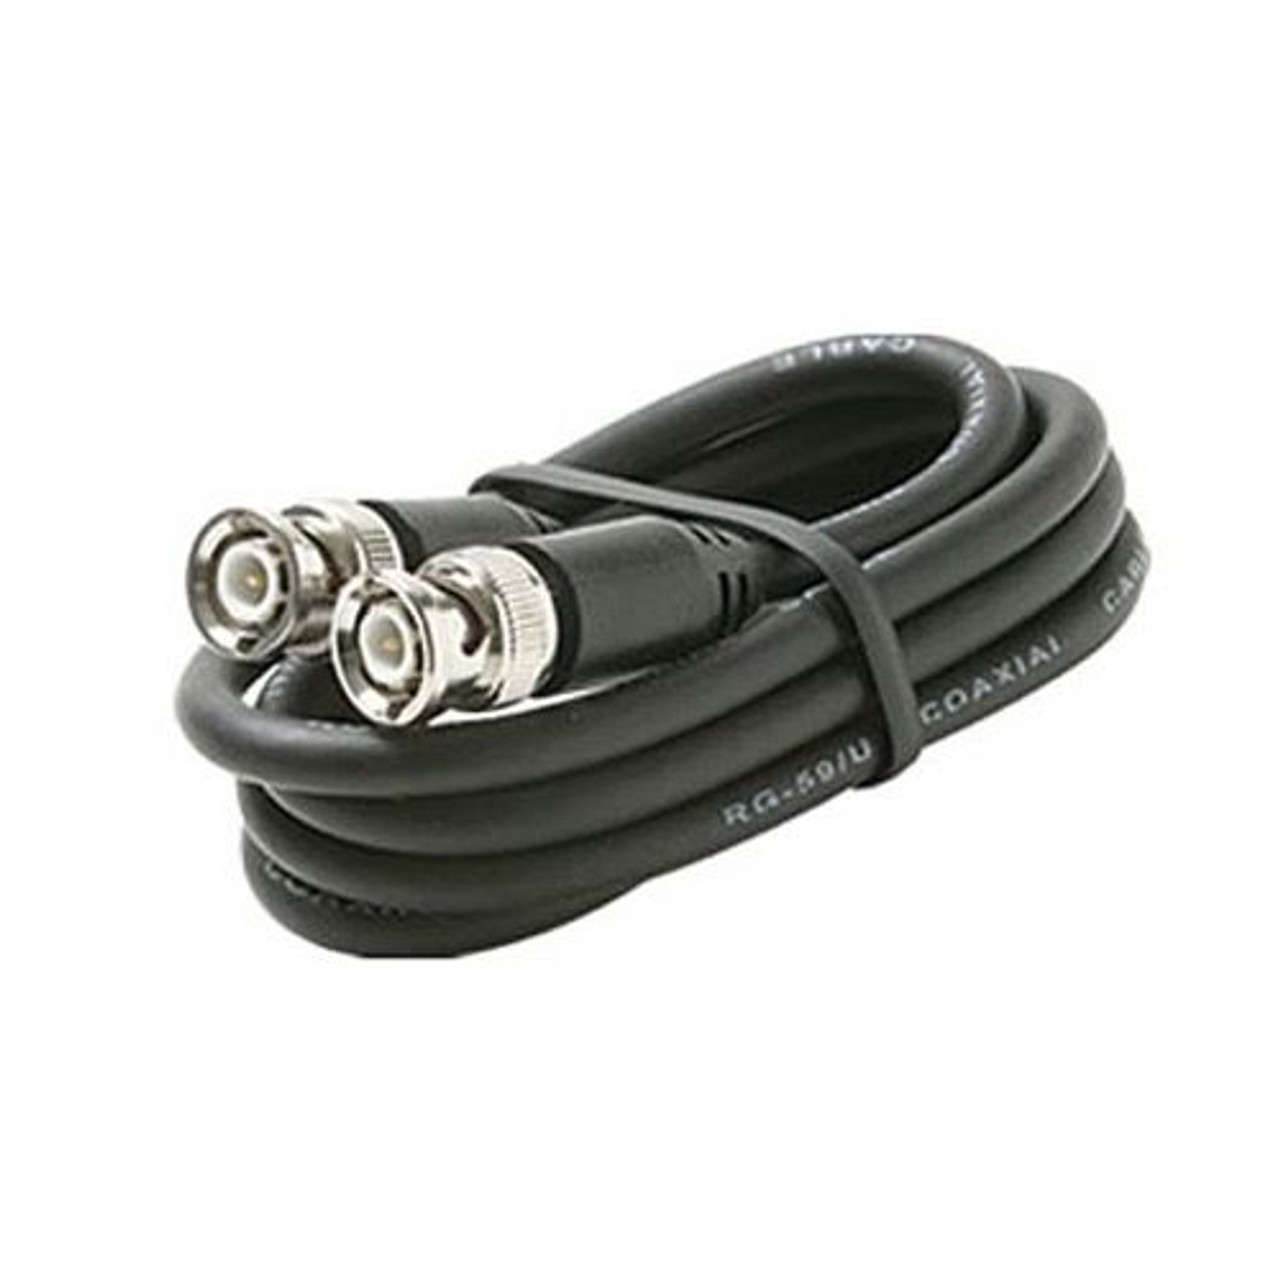 Eagle 3' FT BNC Coaxial Cable RG59 Male to Male Black Plug RG59 Nickel Plate Connector Each End BNC Male to BNC Male RG-59 Factory Installed BNC Connectors